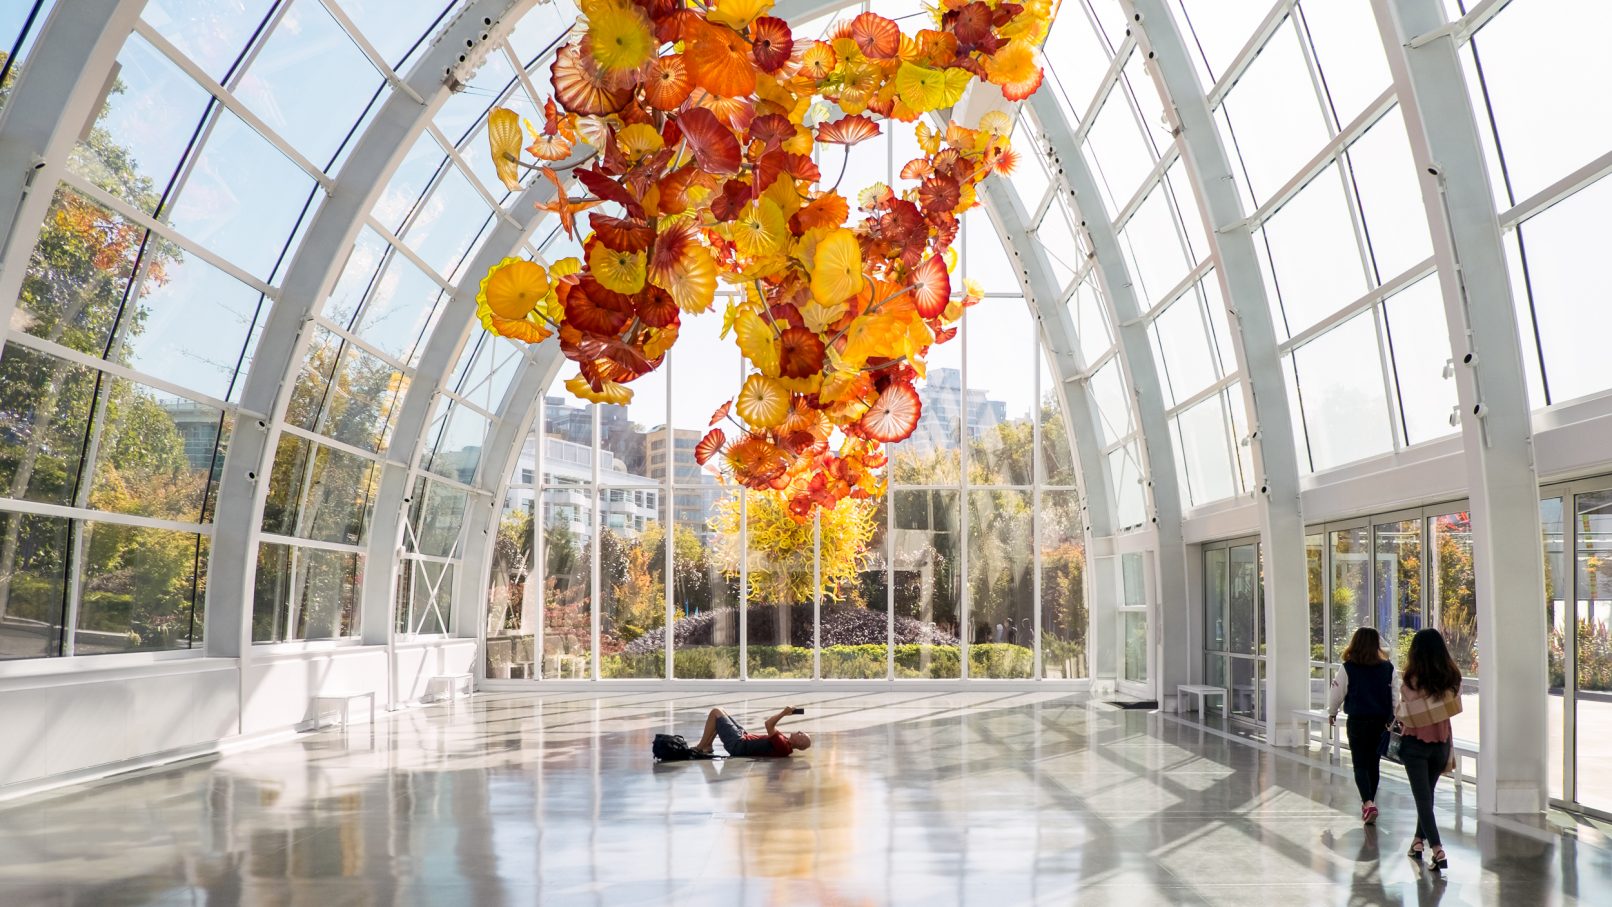 Architectural Photography of the Chihuly Garden and Glass designed by Owen Richards ORA featuring a one point perspective of the interior with a man laying down taking a photo of the massive glass sculpture filling the greenhouse space